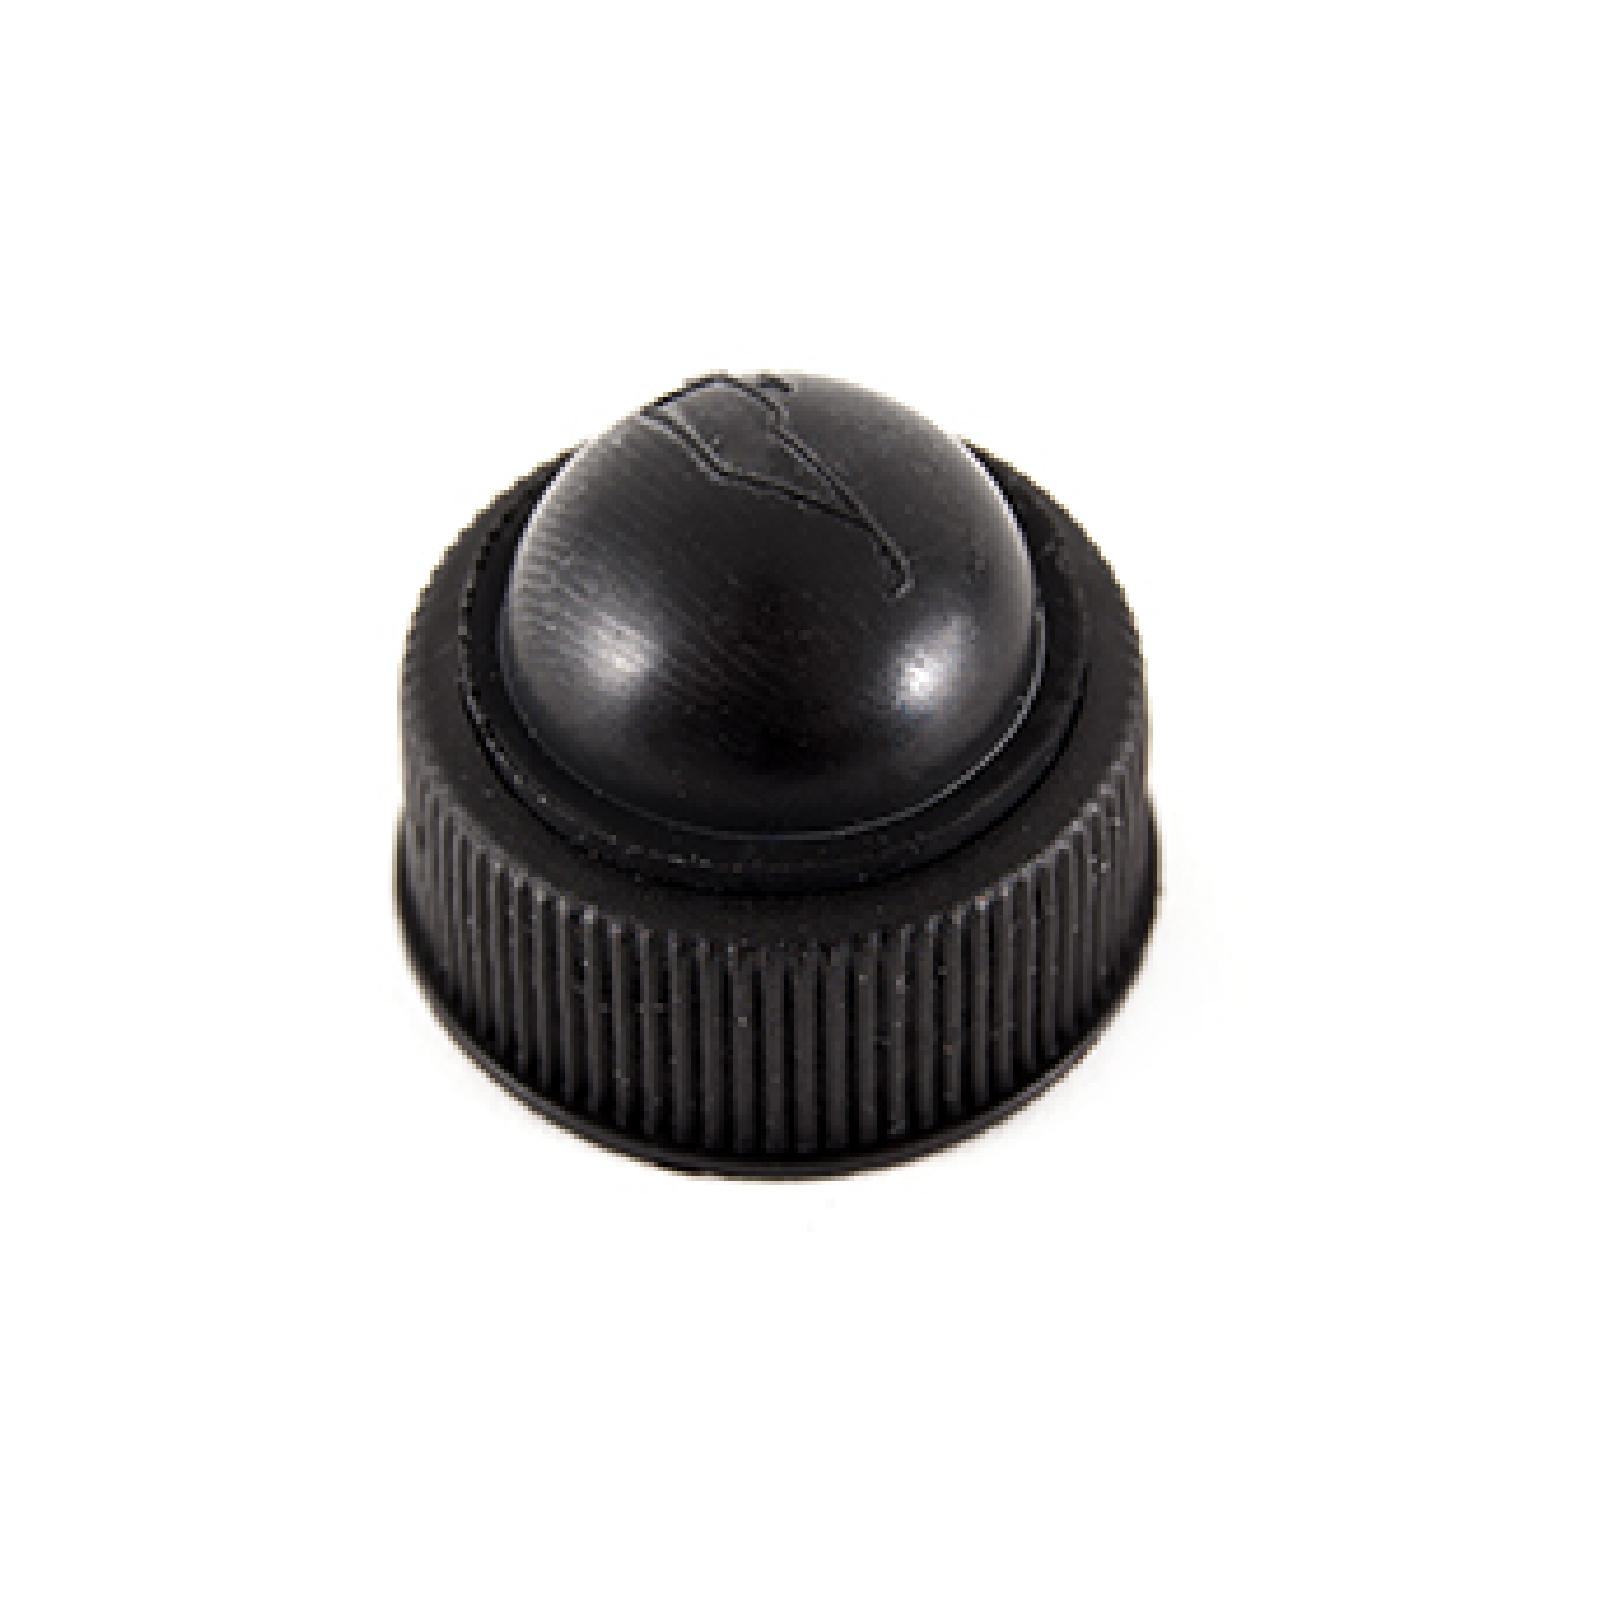 OIL CAP/BULB ASM part# 631-04381 by MTD - Click Image to Close